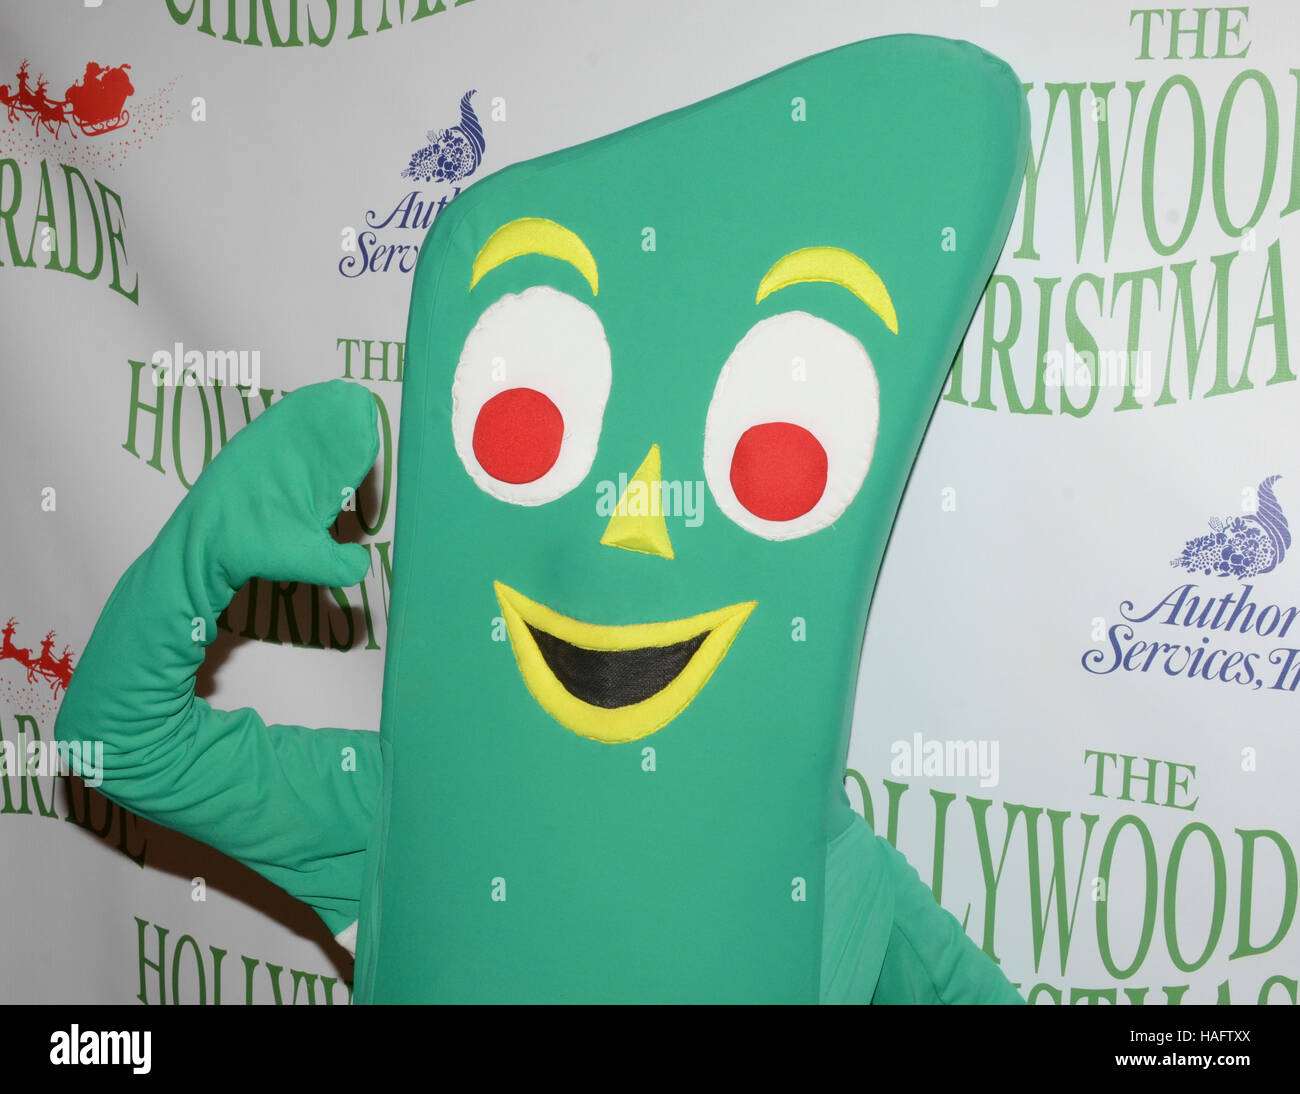 Gumby arrives at the 85th Annual Hollywood Christmas Parade in Hollywood on Hollywood Boulevard on November 27, 2016. Stock Photo